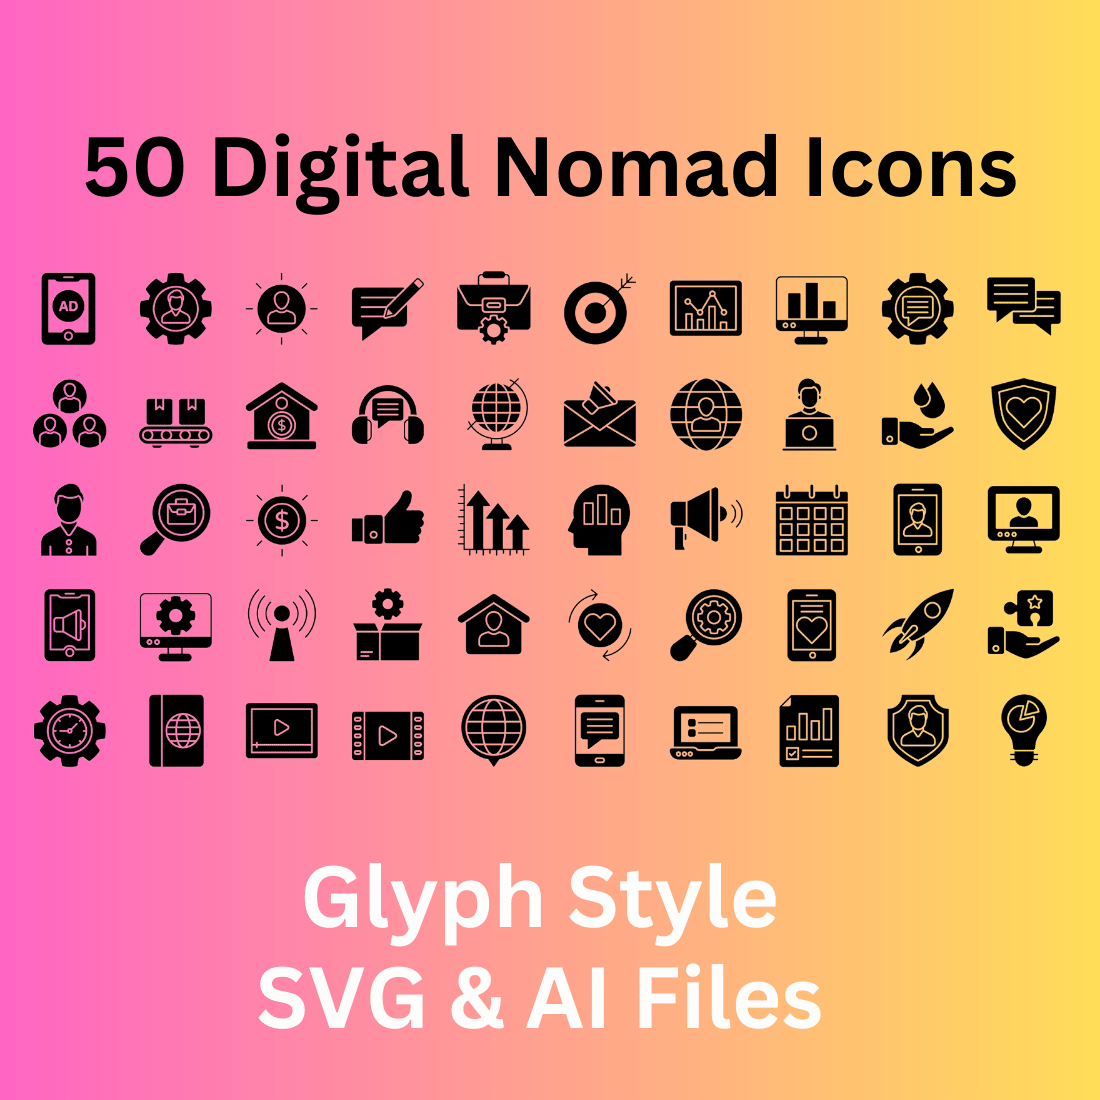 Digital Nomad Set 50 Glyph Icons - SVG And AI Files cover image.